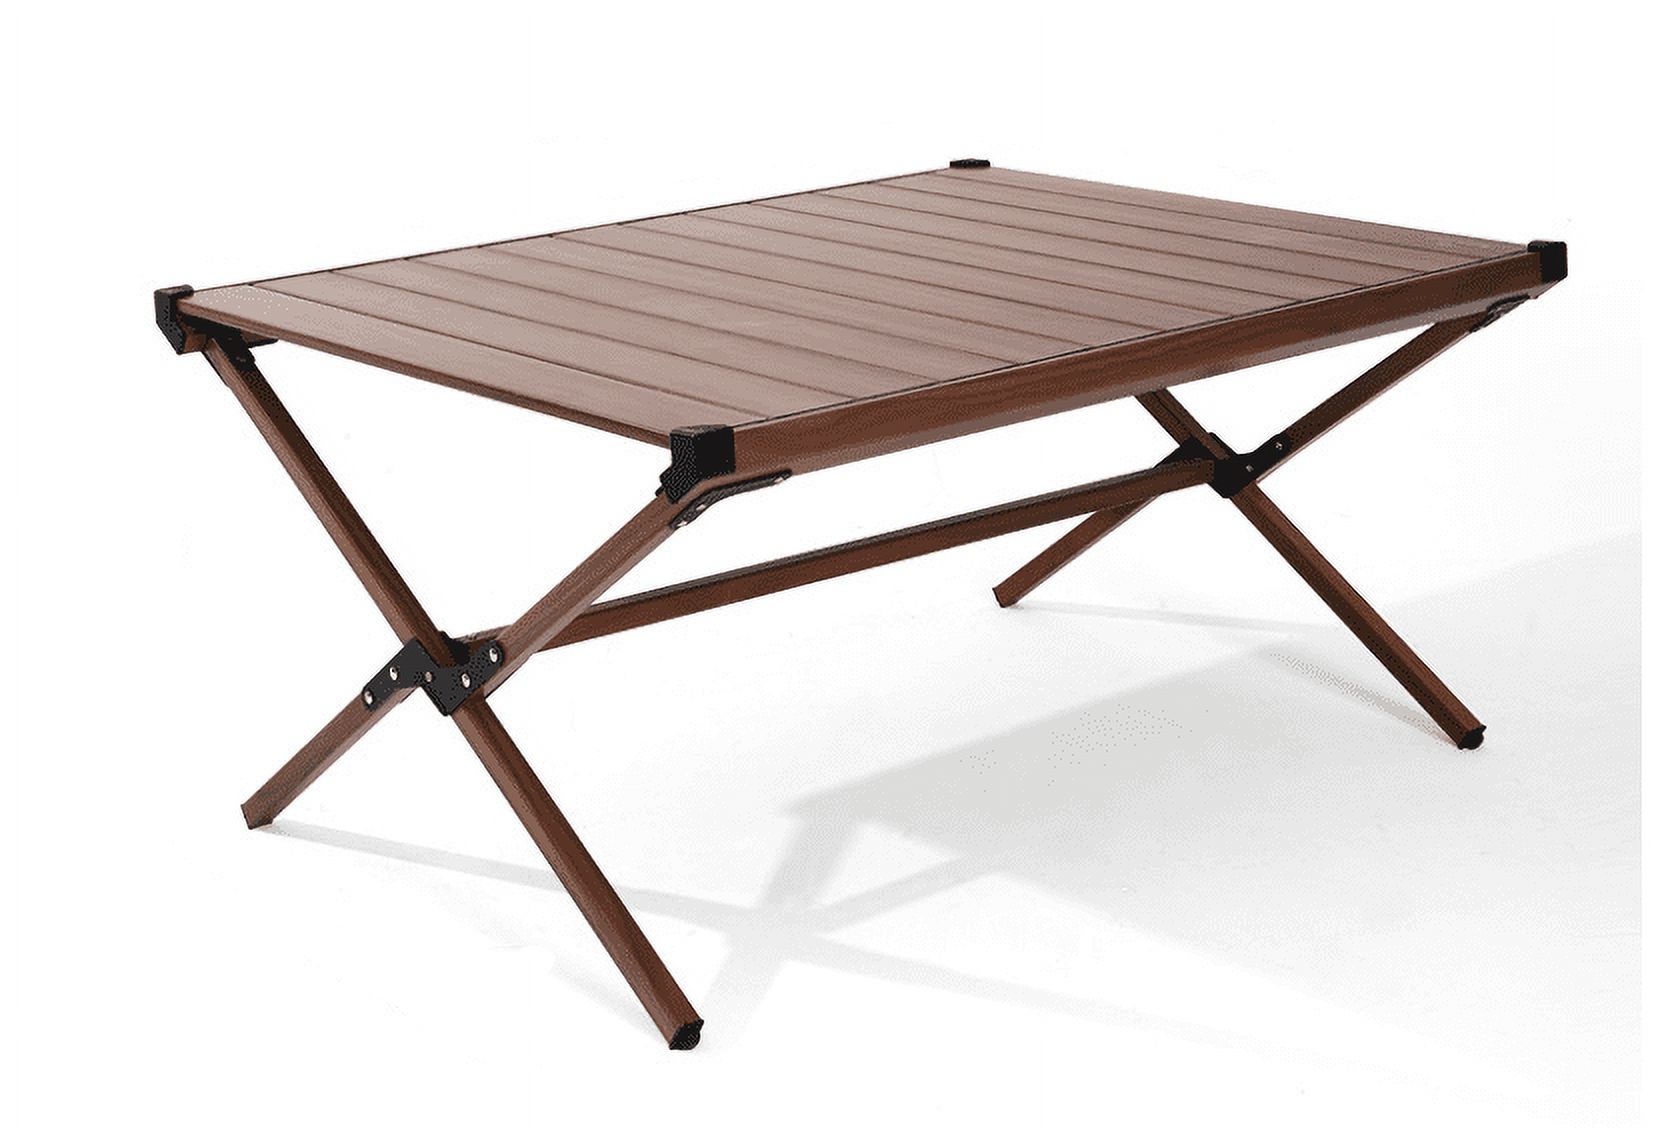 Ozark Trail Aluminum Roll-Top Camping Table,   YMMV.   In store. I just got 1. Dark Brown $17